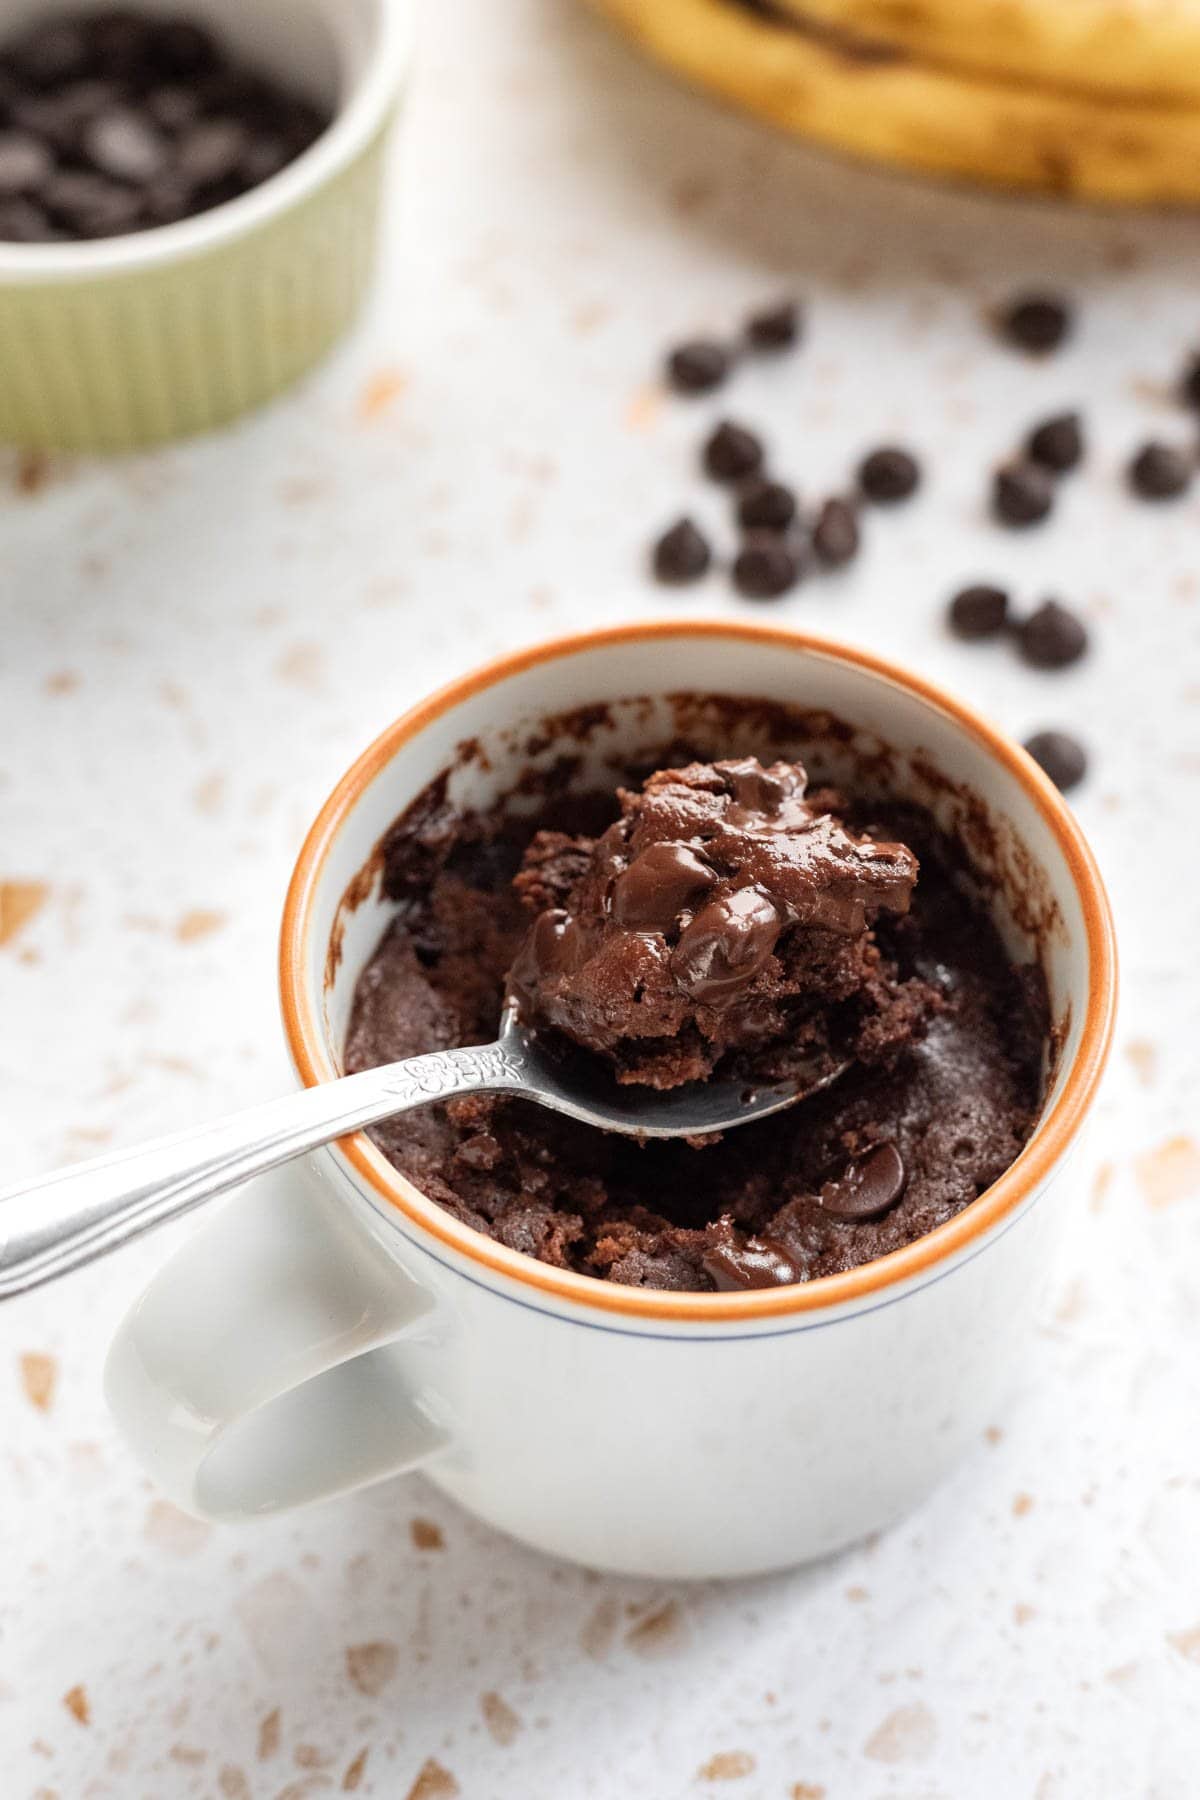 A spoon scooping up a bite of healthy brownie from a white mug.